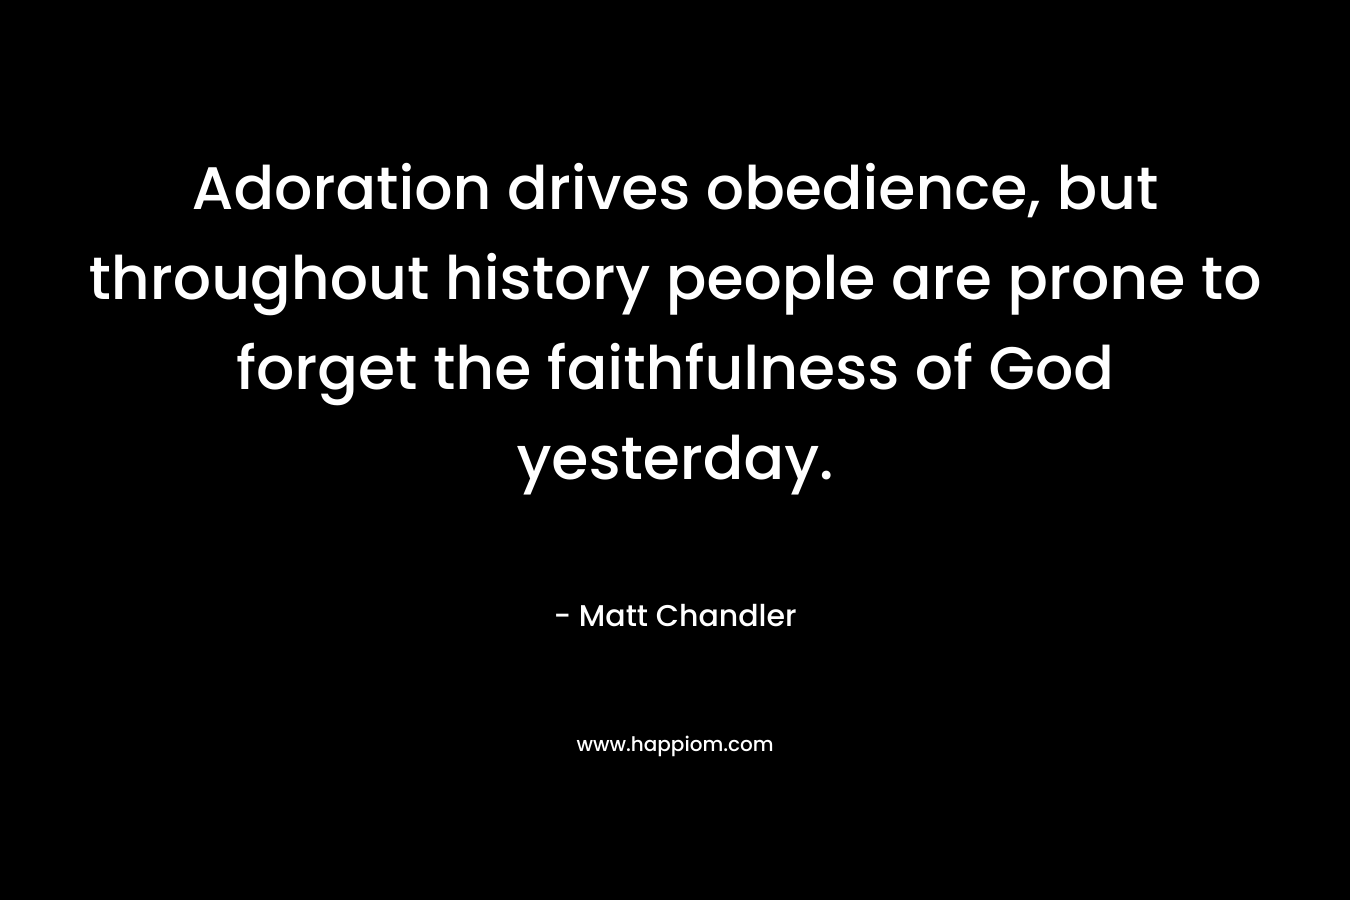 Adoration drives obedience, but throughout history people are prone to forget the faithfulness of God yesterday.